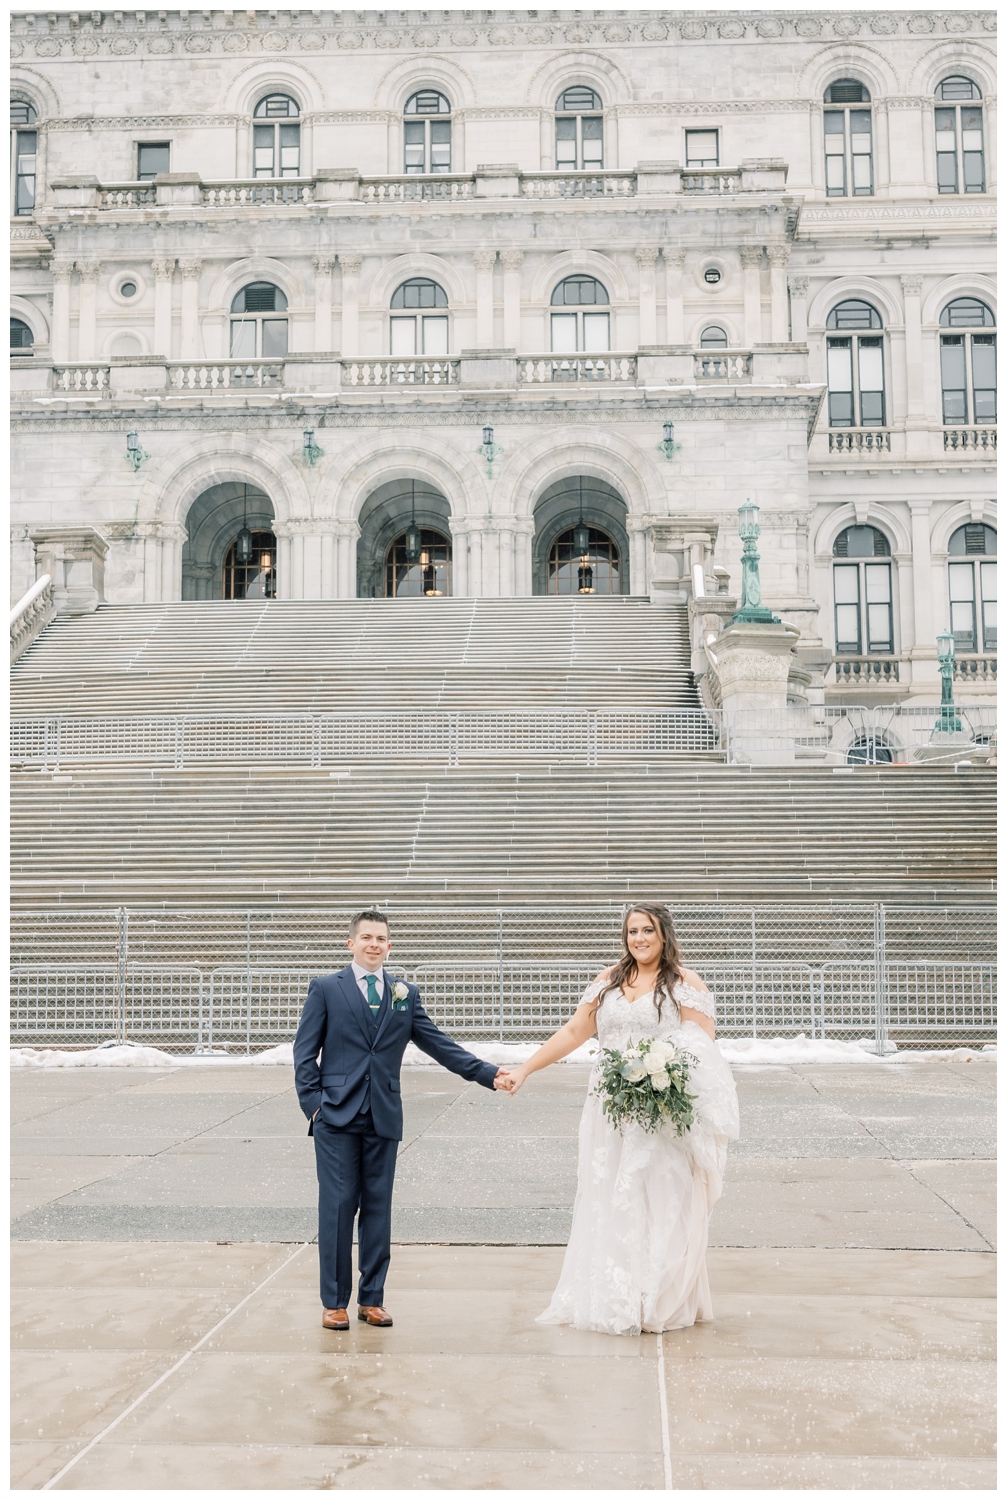 Bride and groom holding hands in front of the Capital Building in Albany, NY on their wedding day. They got married at The State Room on State Street in downtown Albany on a snowy March day.